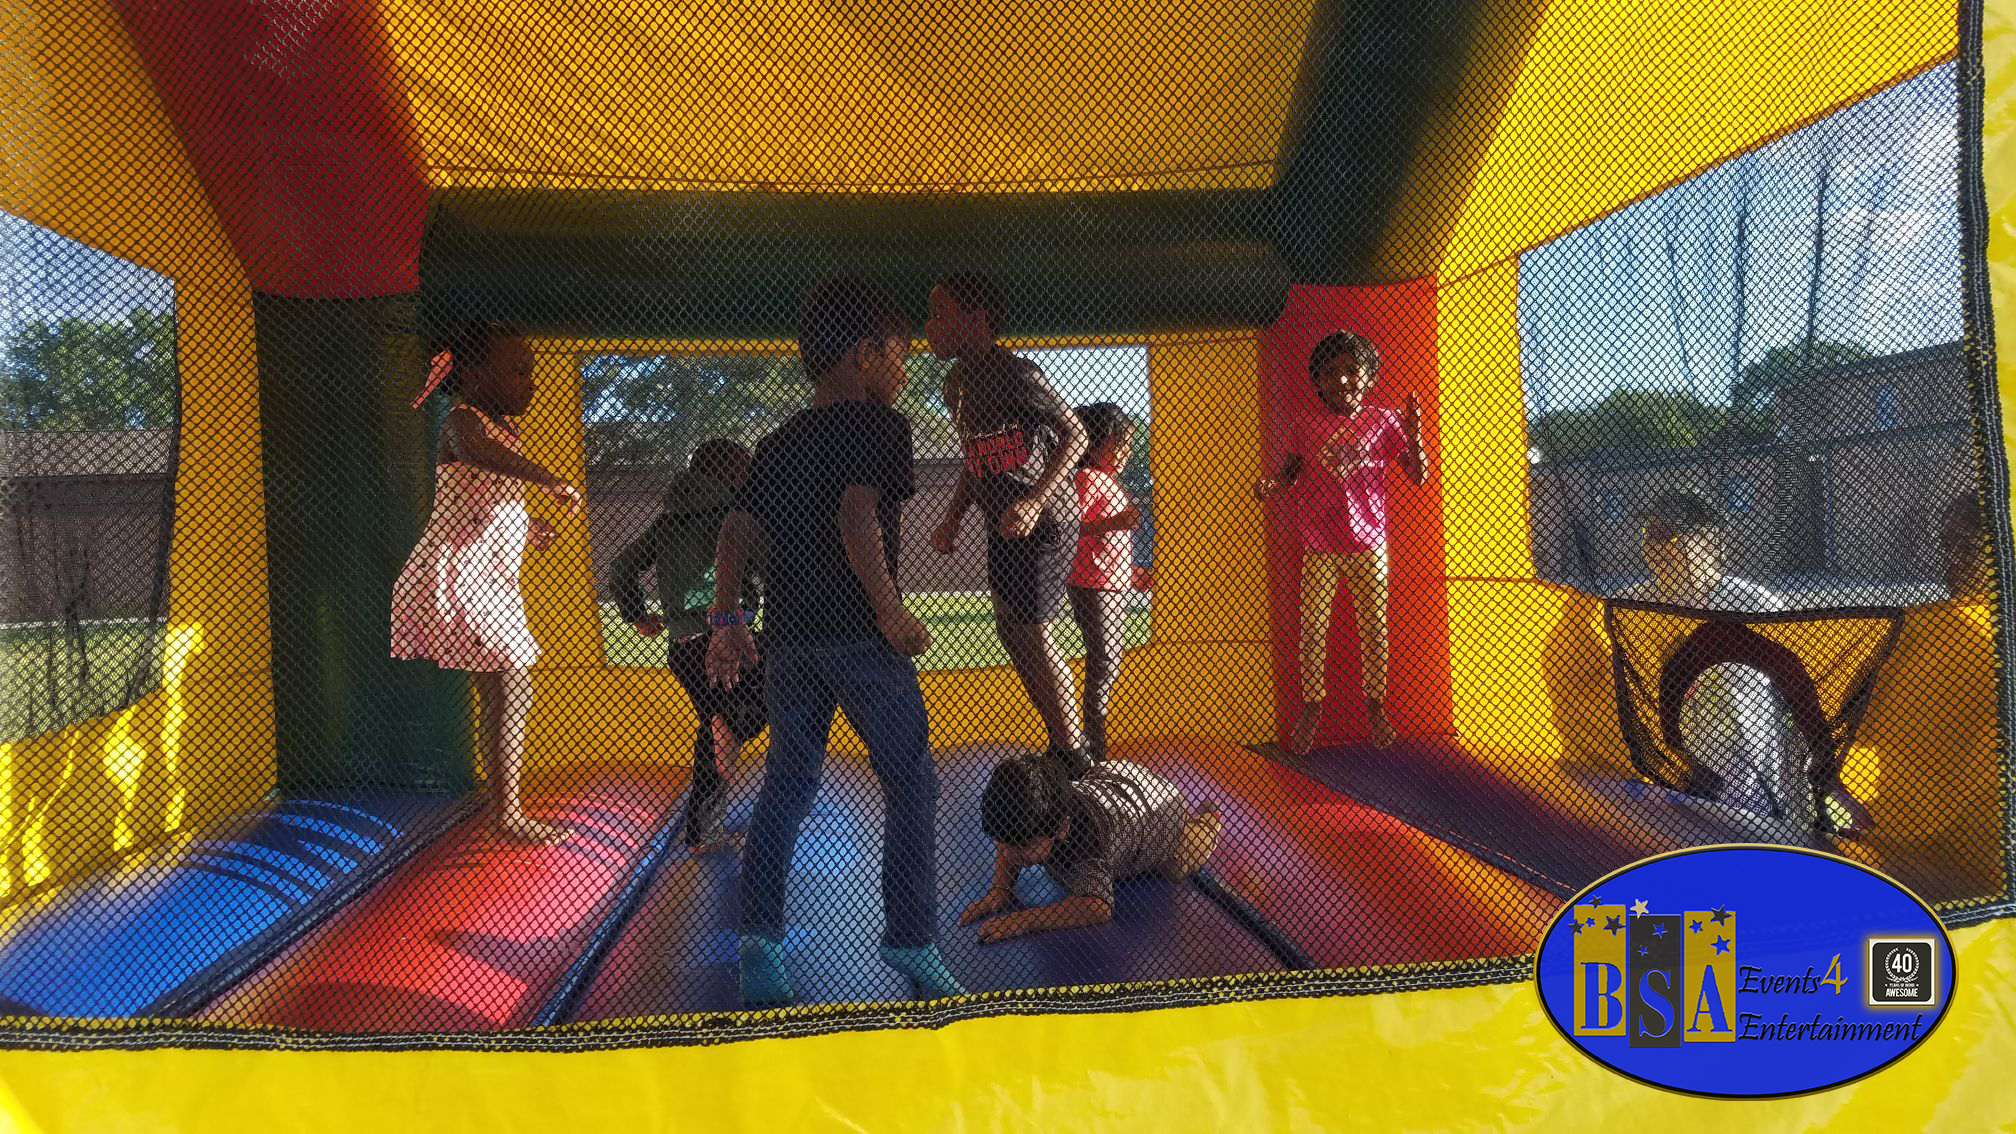 bounce house rental, bouncehouse rentals, combo bounce house rentals